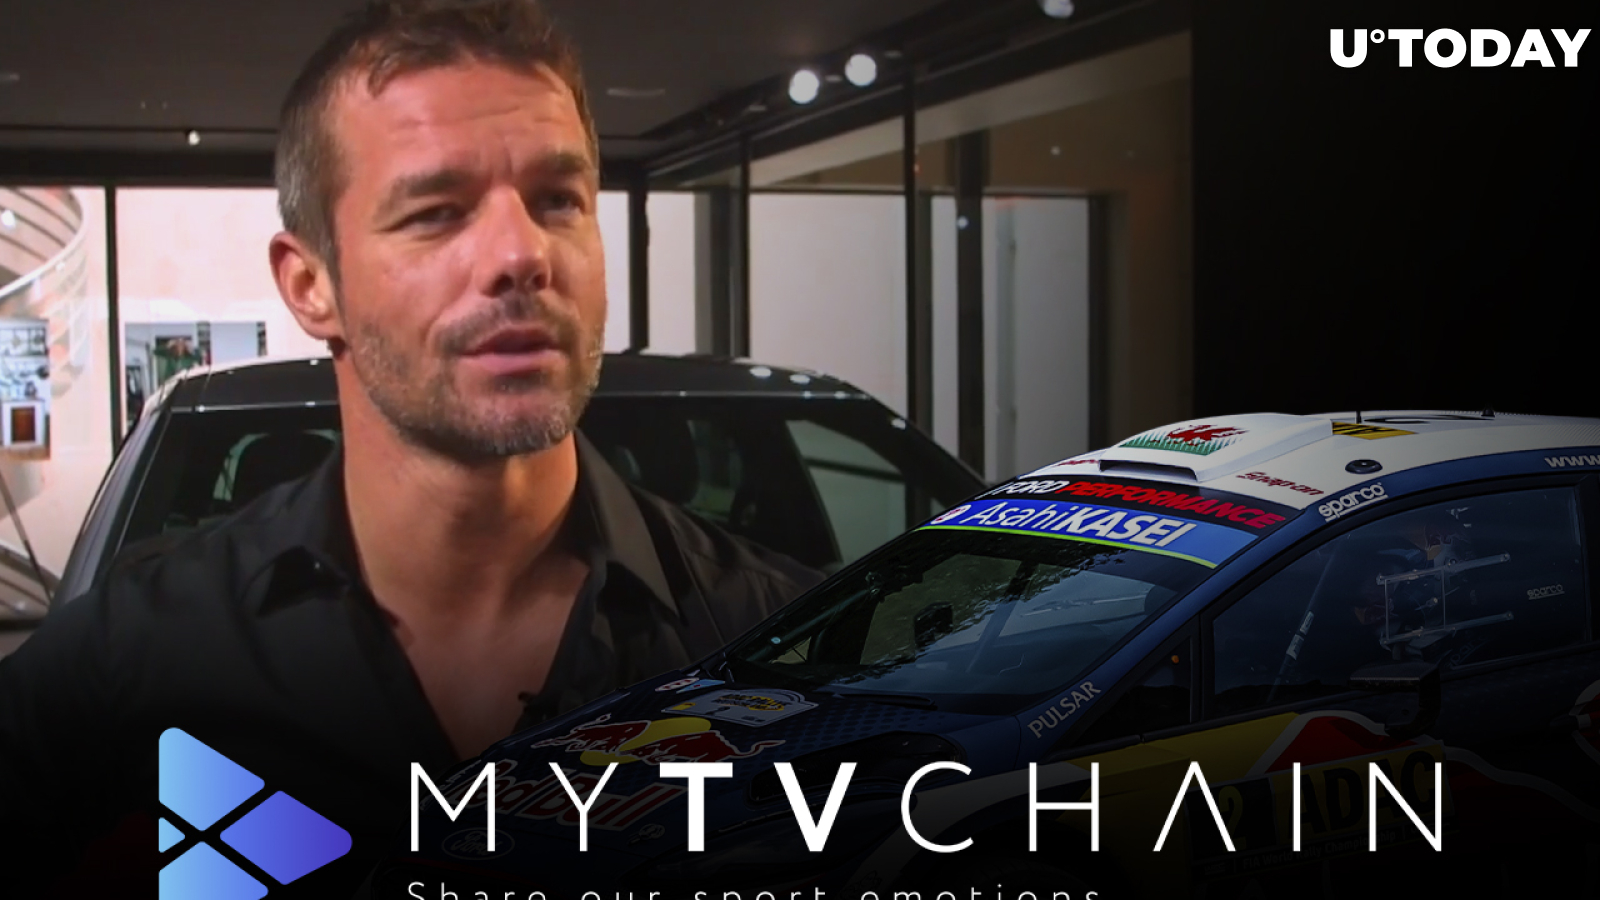 WRC World Champion Sebastien Loeb to Launch First NFT collection with MyTVchain